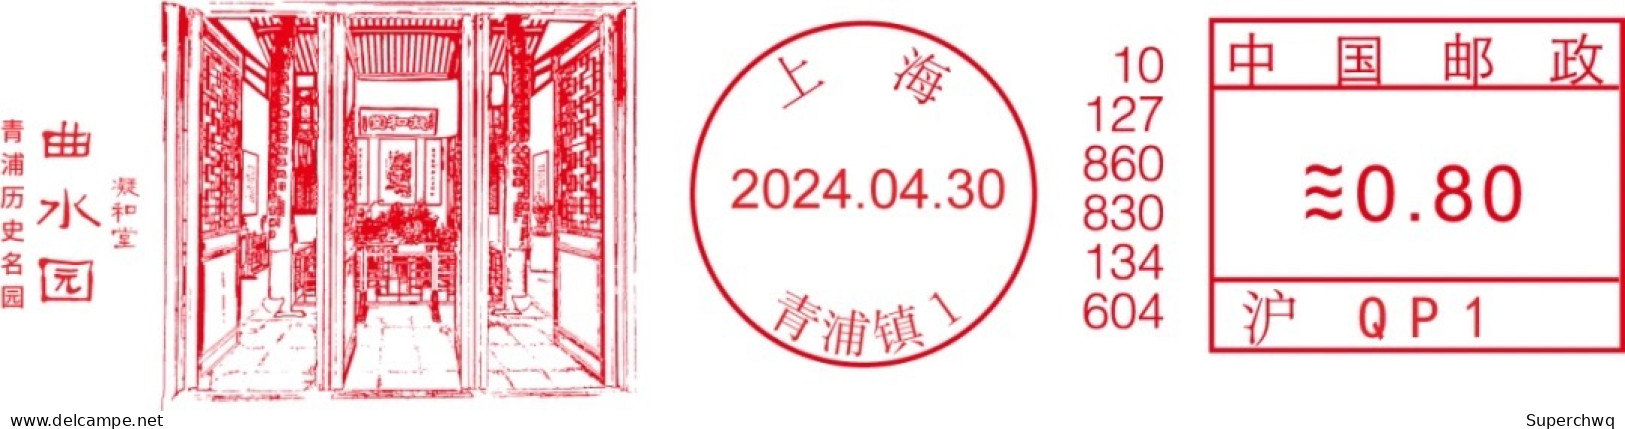 China cover "Qingpu Historical Park - Qushui Park" (Shanghai) Postage Machine Stamped First Day Actual Delivery Seal - Buste